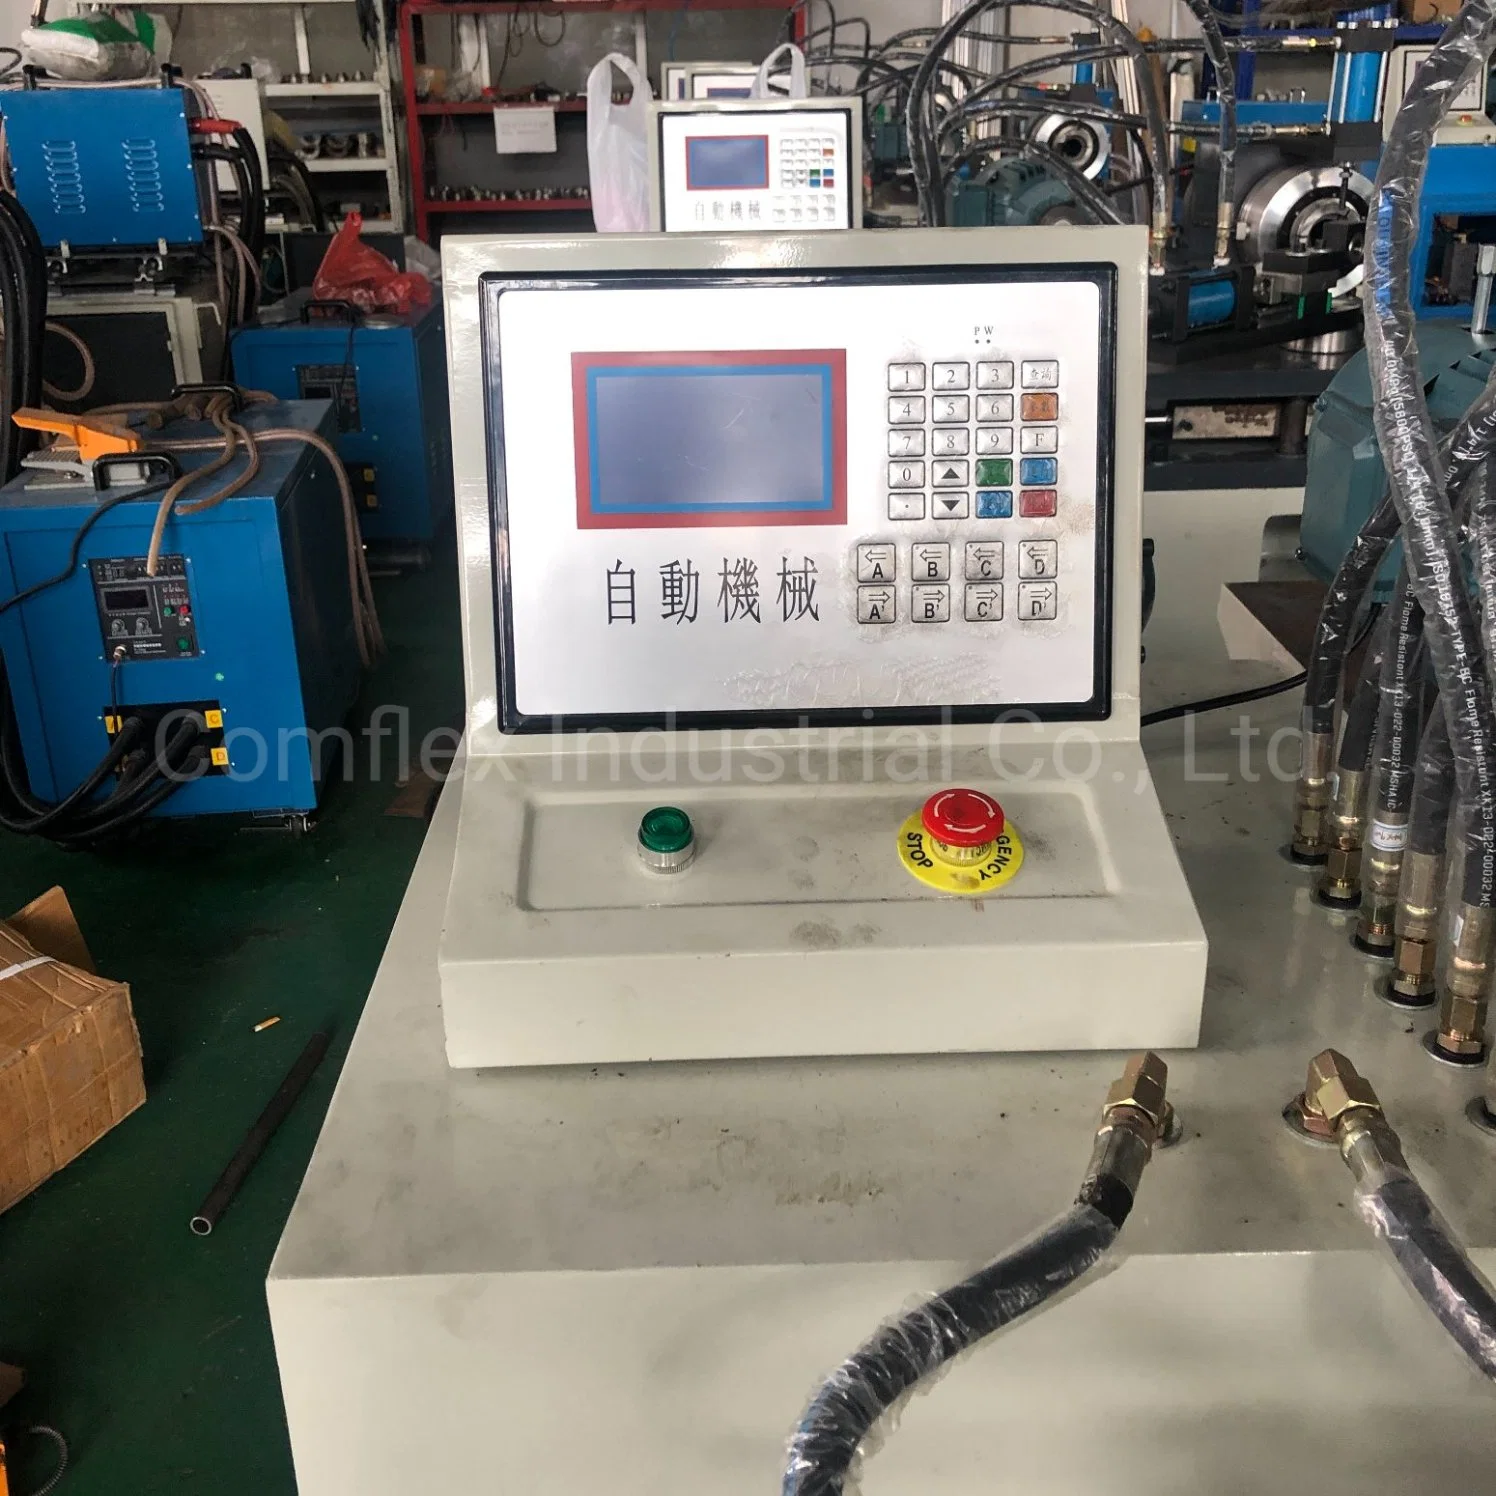 Pipe and Tube End Closing Machine Pipe Sealing Machine with RF Heating